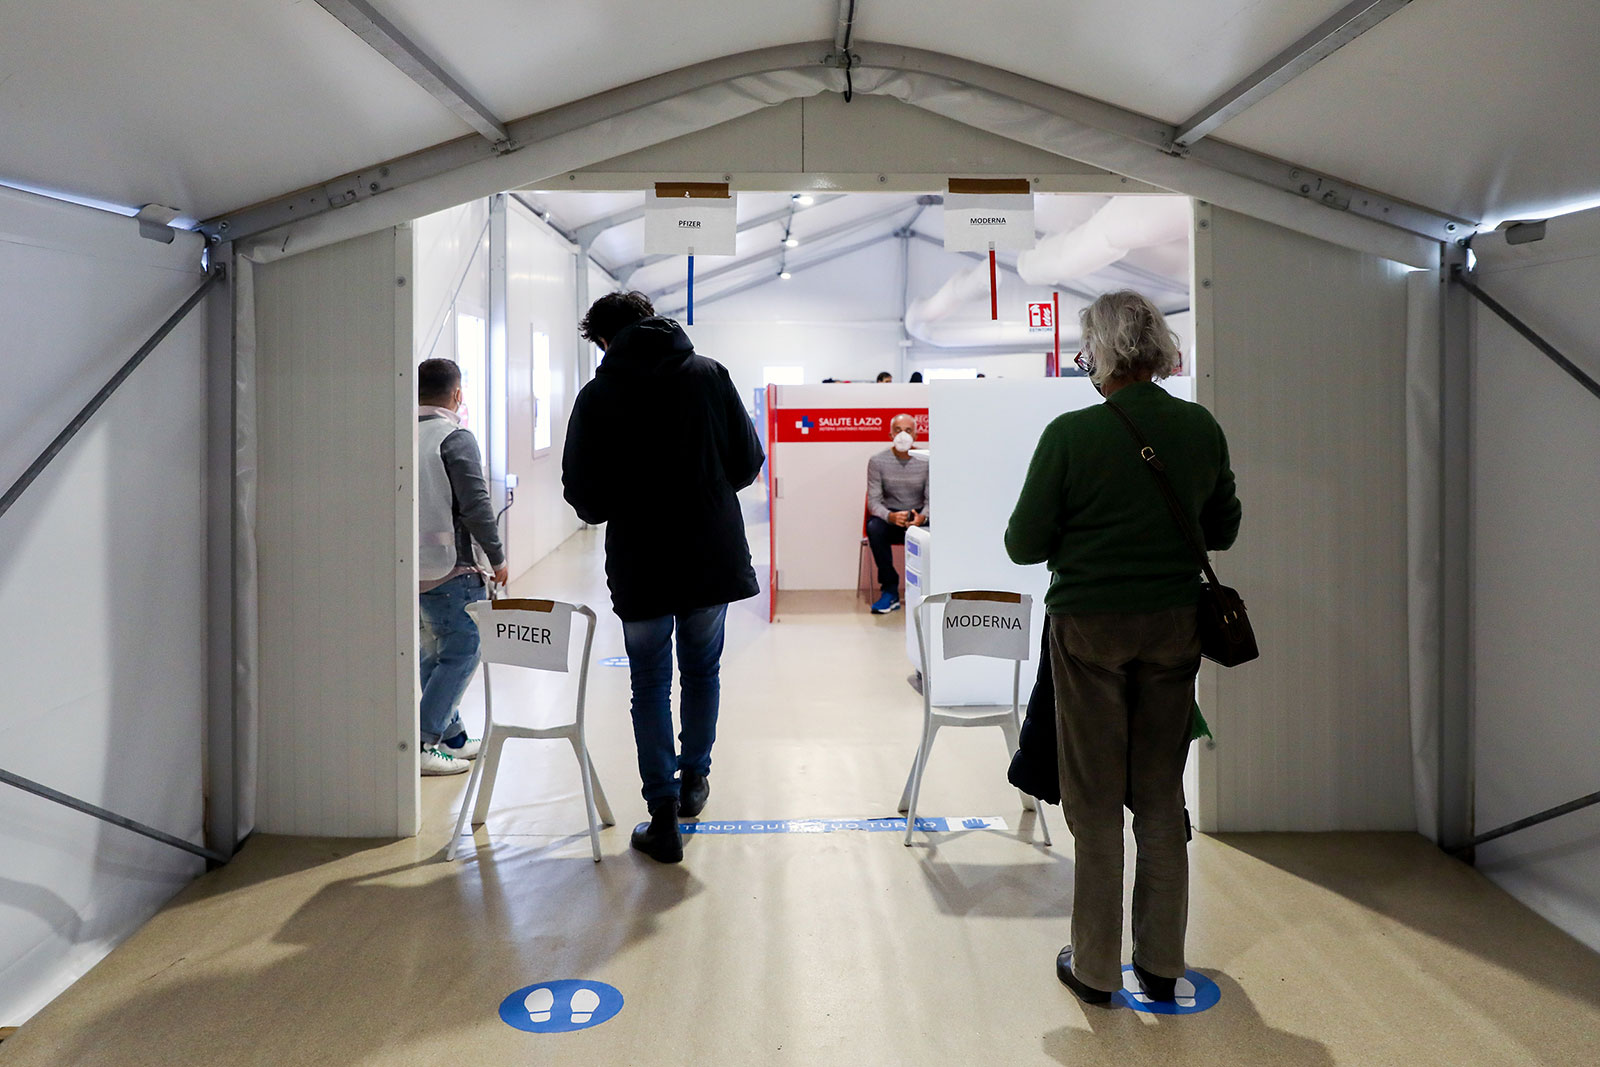 People wait in line at a Covid-19 vaccination center at a train station in Rome, Italy, on December 3.